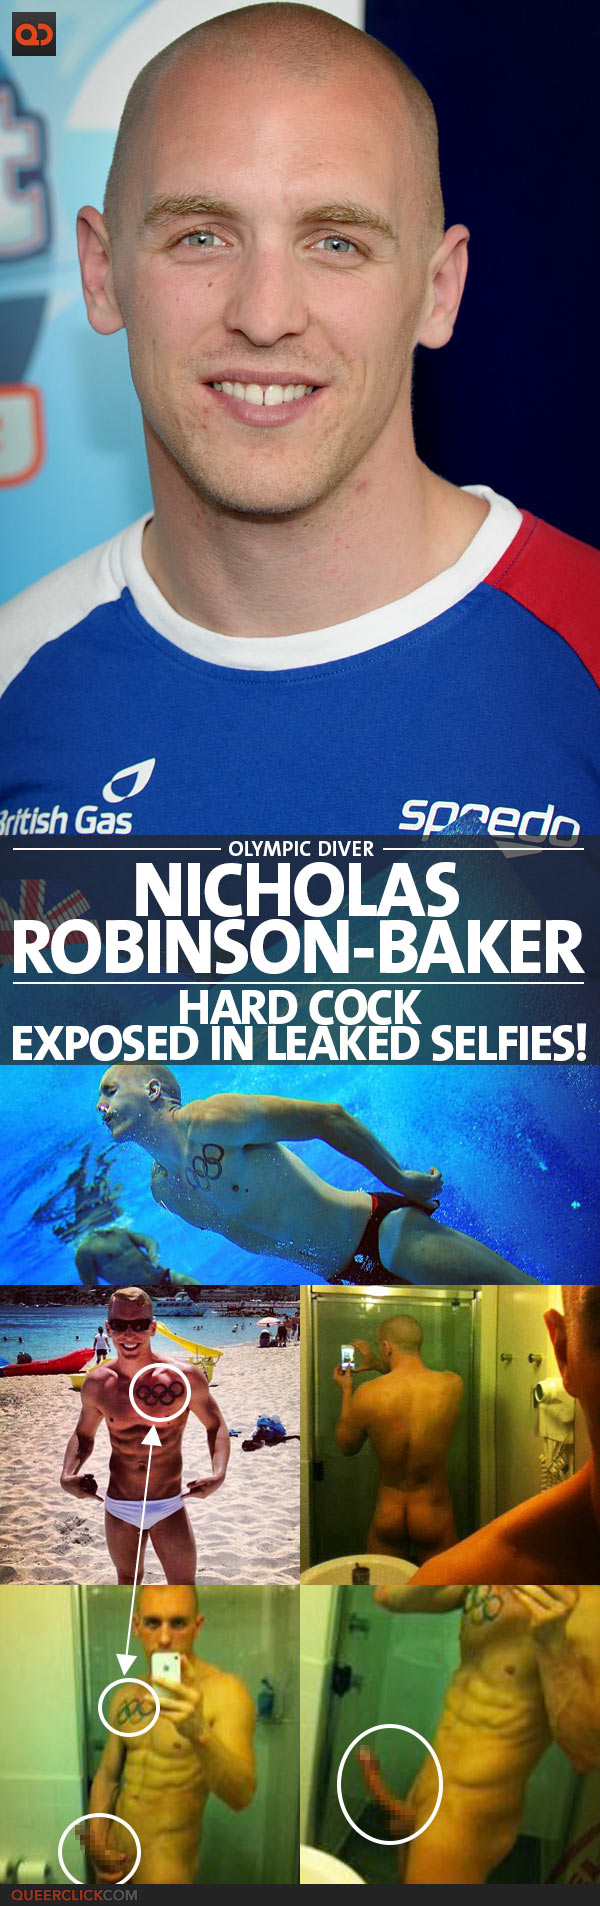 Nicholas Robinson-baker, Olympic Diver, Hard Cock Exposed In Leaked Selfies!